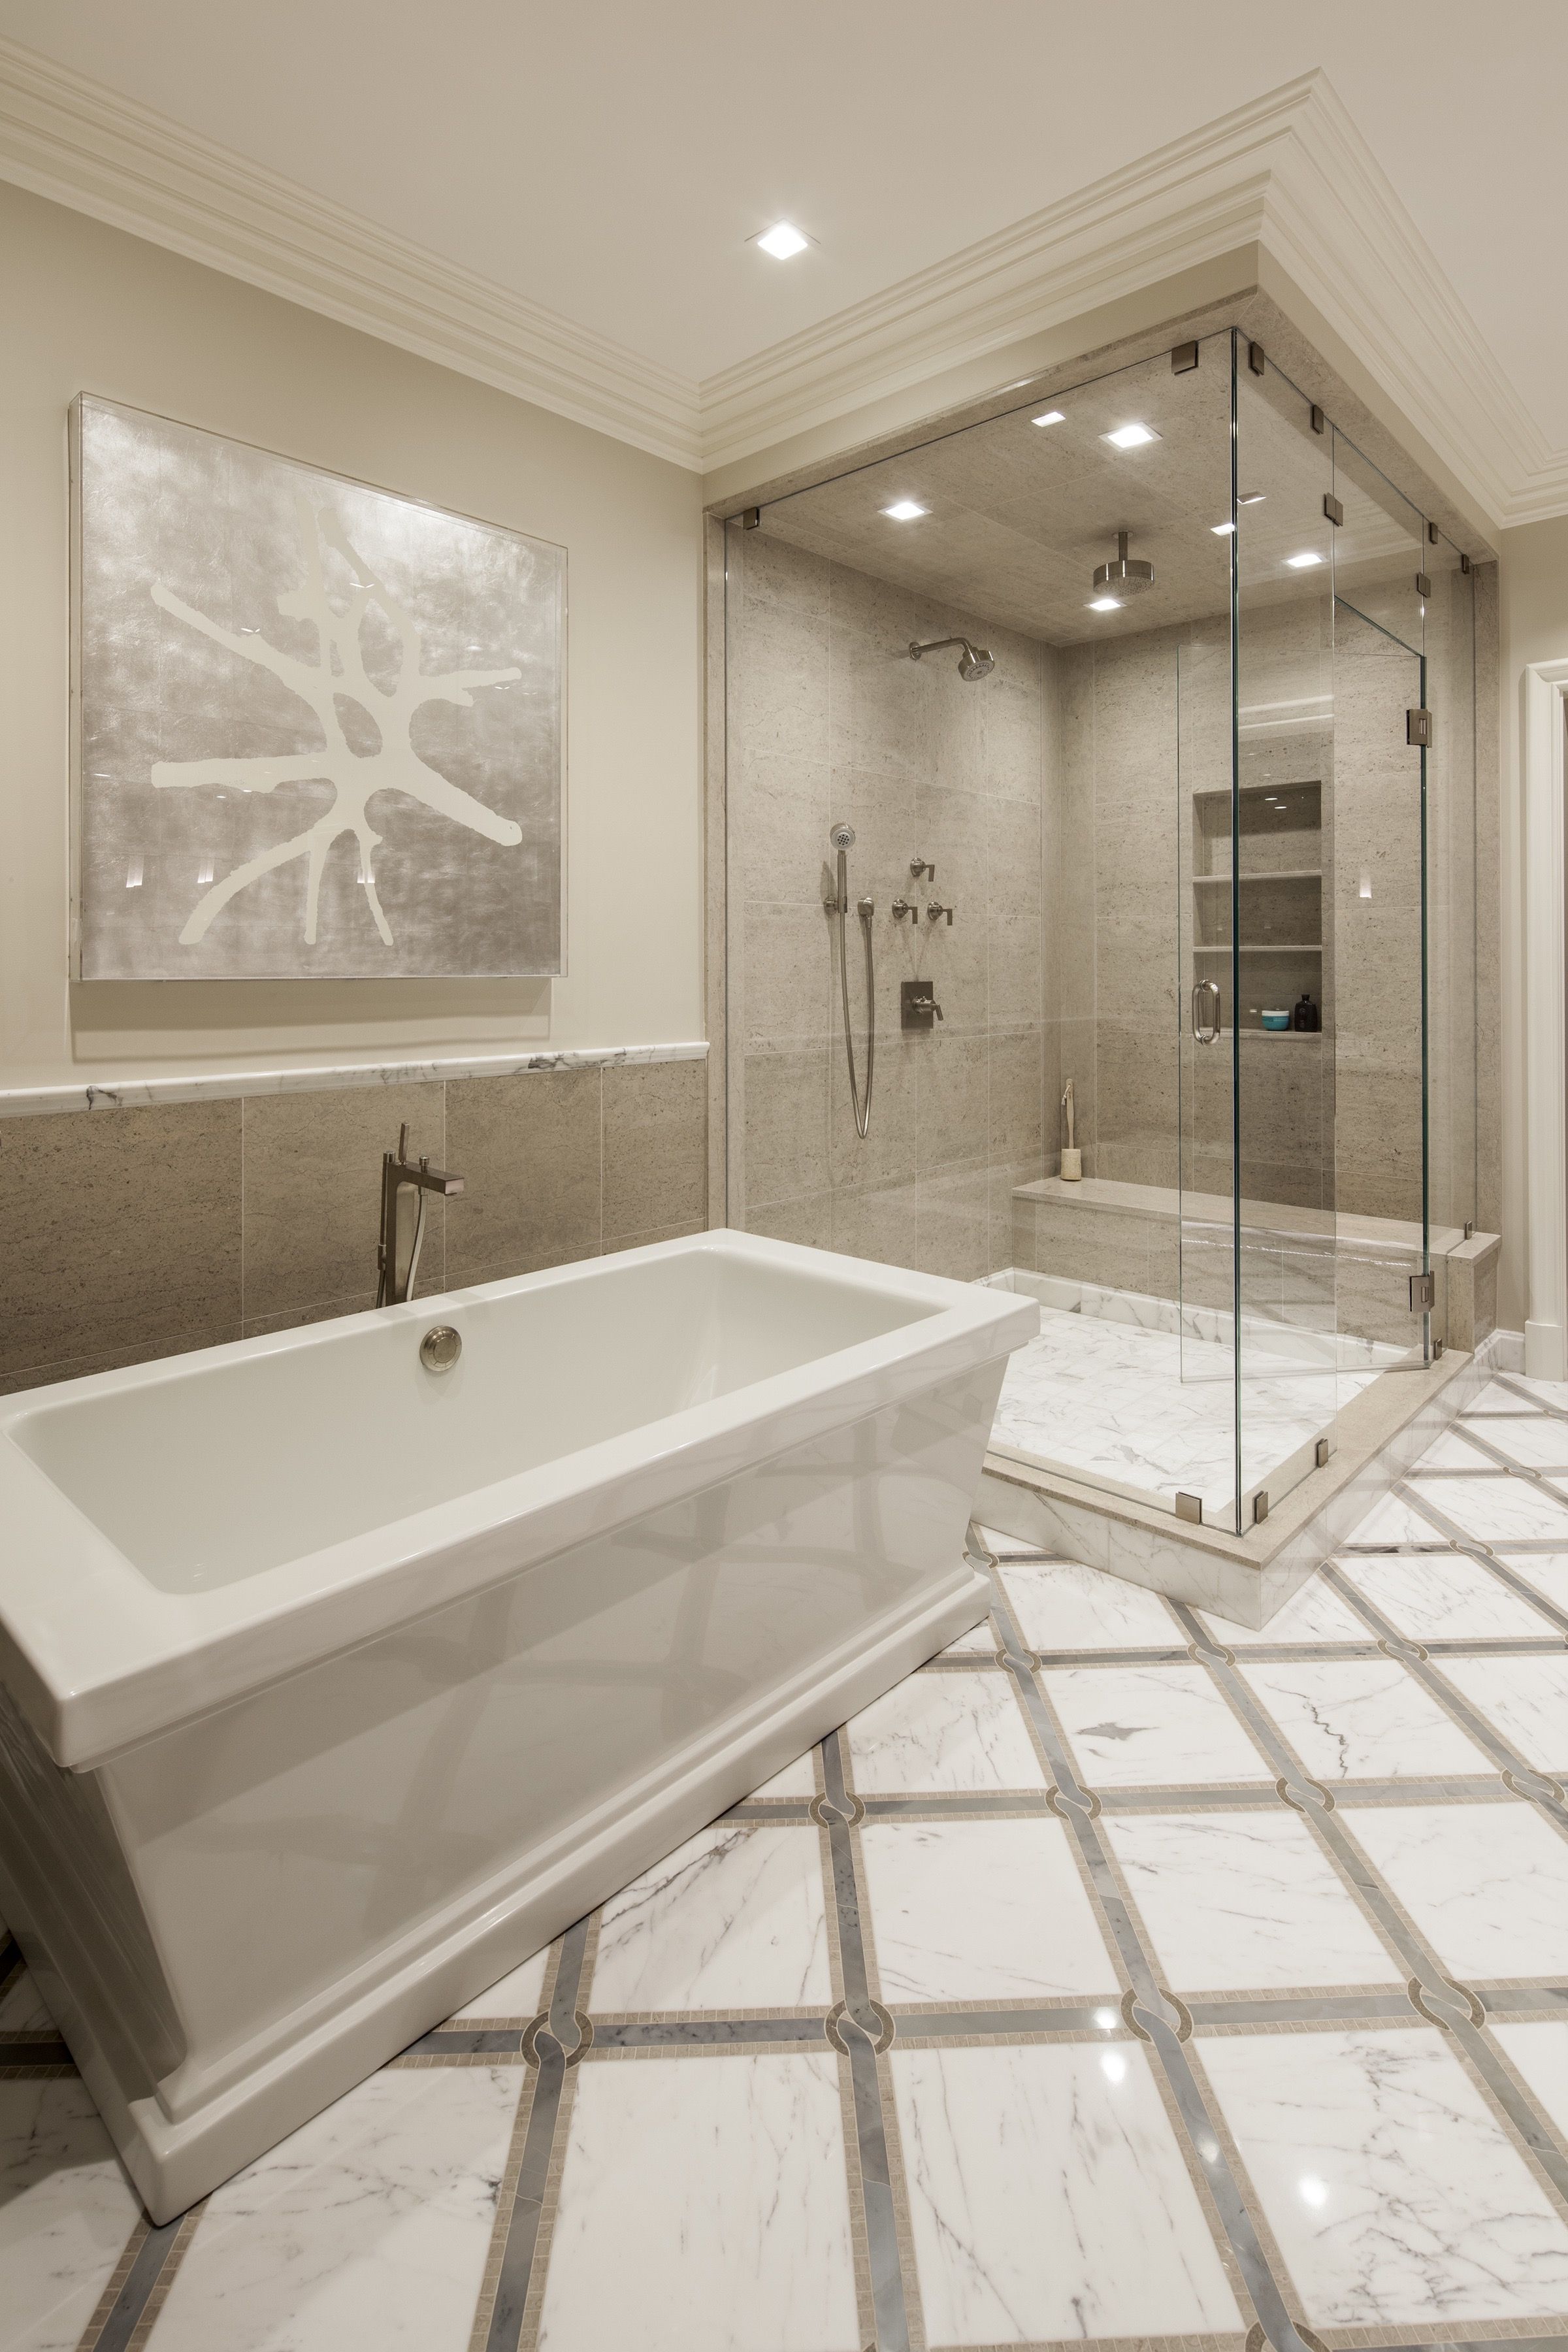 Elegance Spa Worthy Bathroom With Soaker Tub And Walk In Shower (View 13 of 29)